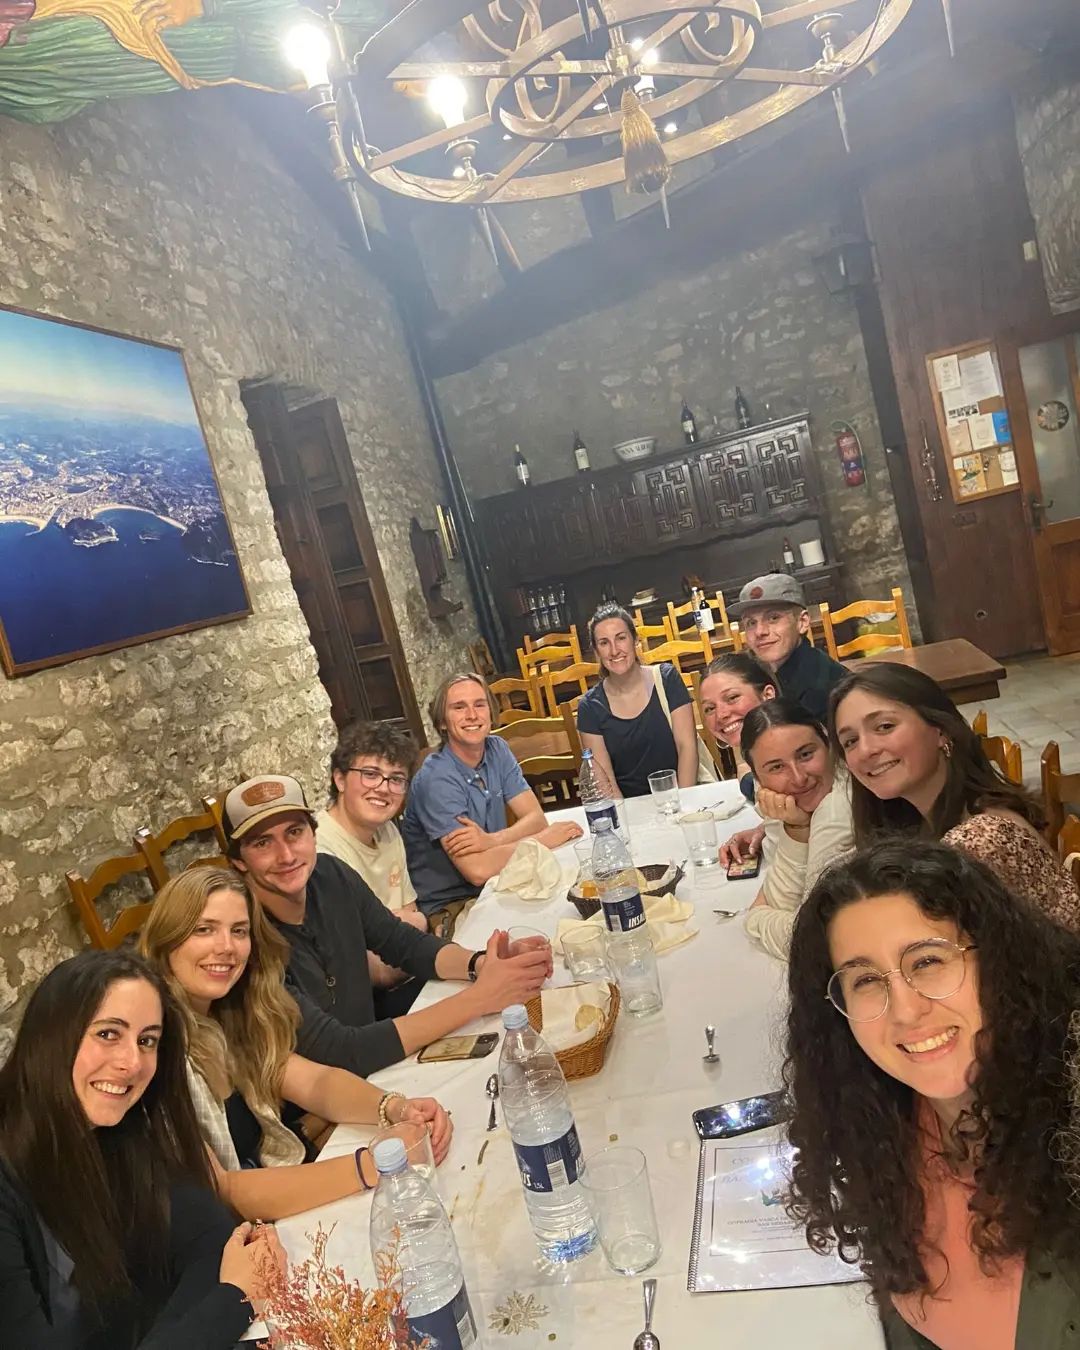 Students enjoying a delicious meal together in San Sebastián, Spain.